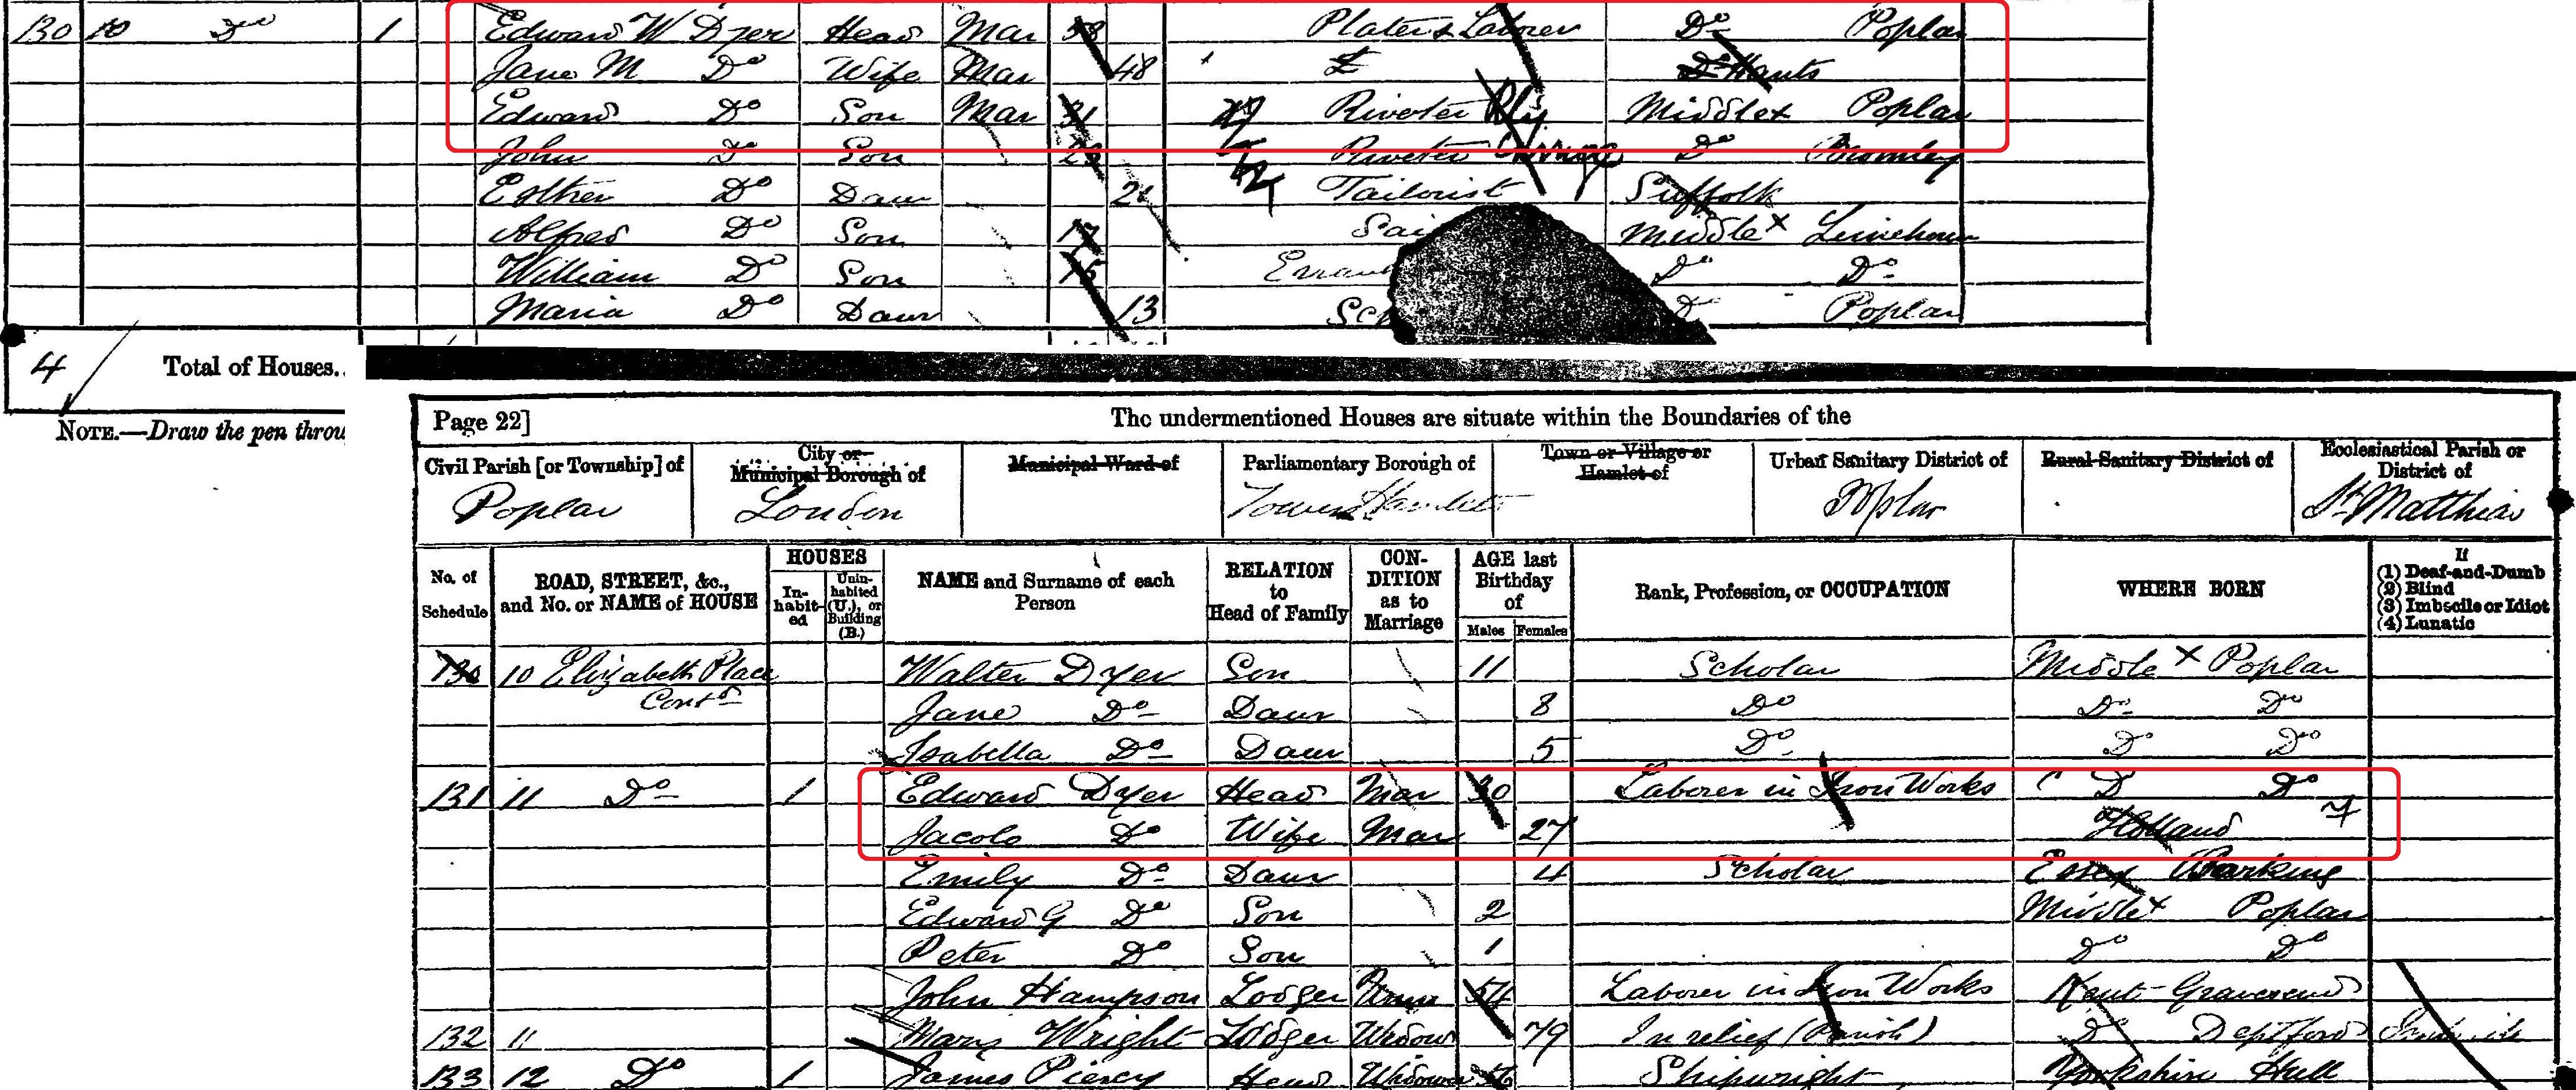 Two listings in the Census at TheGenealogist.co.uk for Danny's great grandfather at 10 and 11 Elizabeth Place, Poplar.